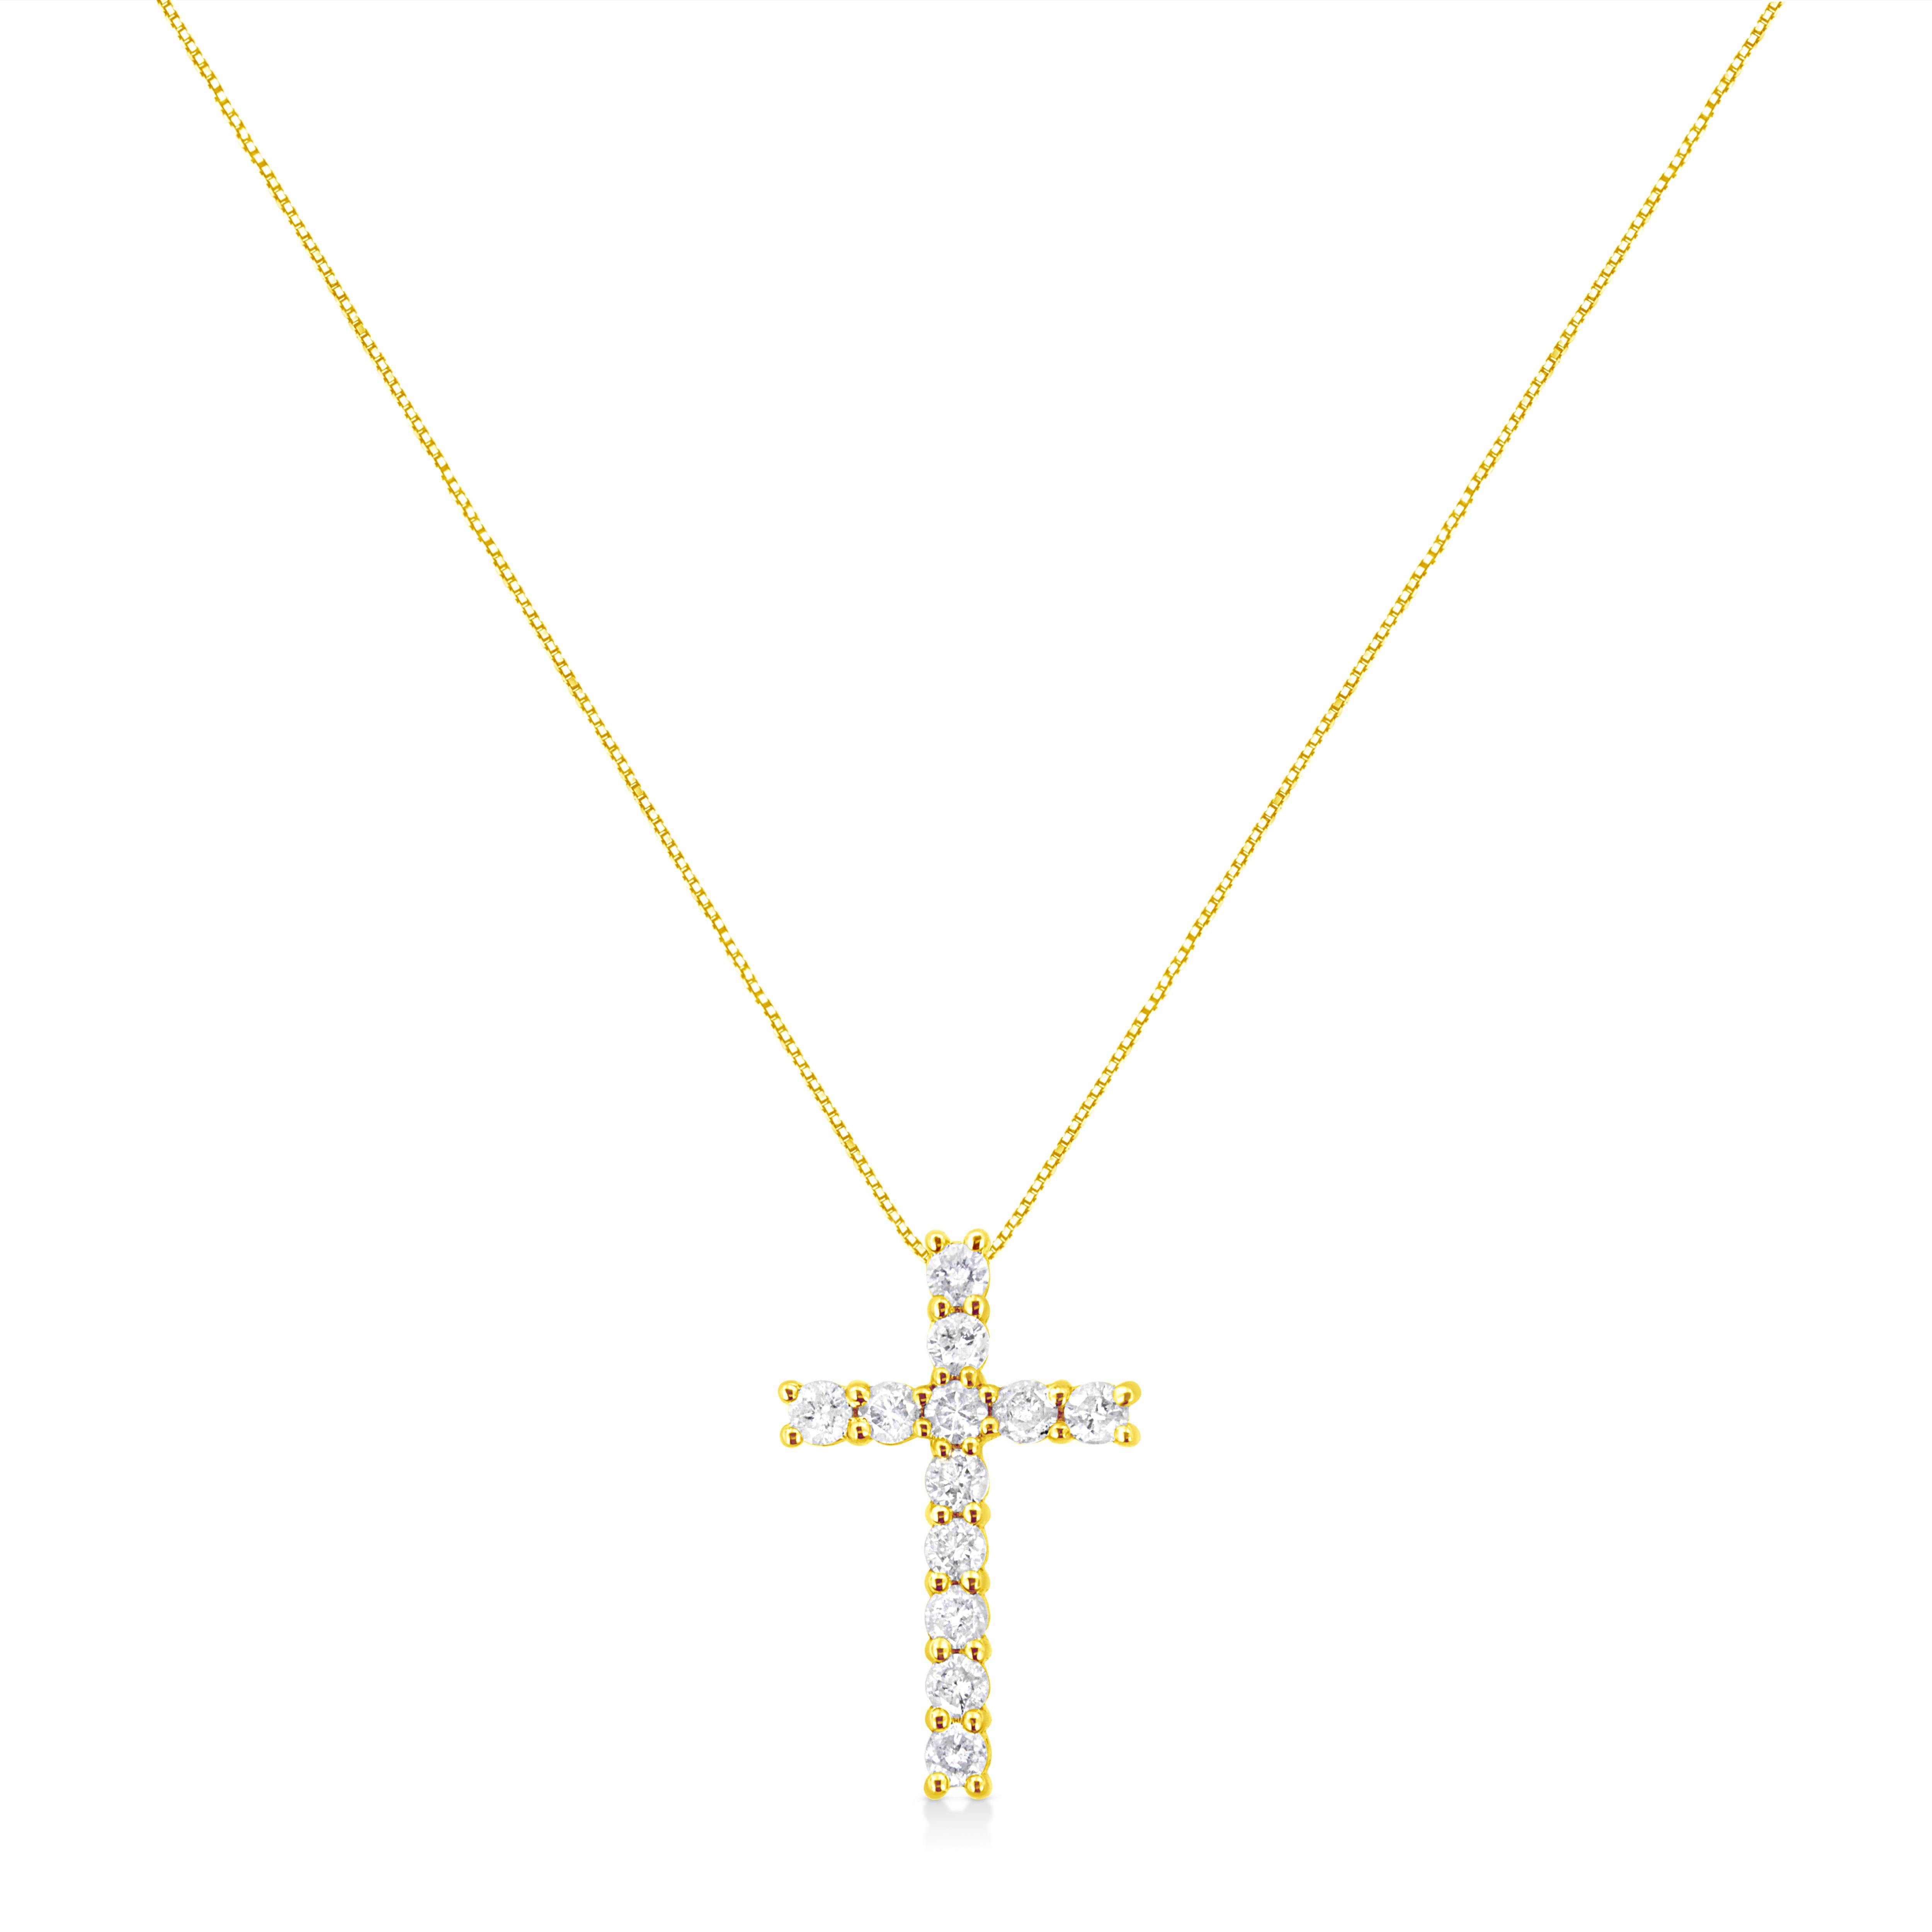 Contemporary Yellow Gold Plated Sterling Silver 1.0 Carat Diamond Cross Pendant Necklace